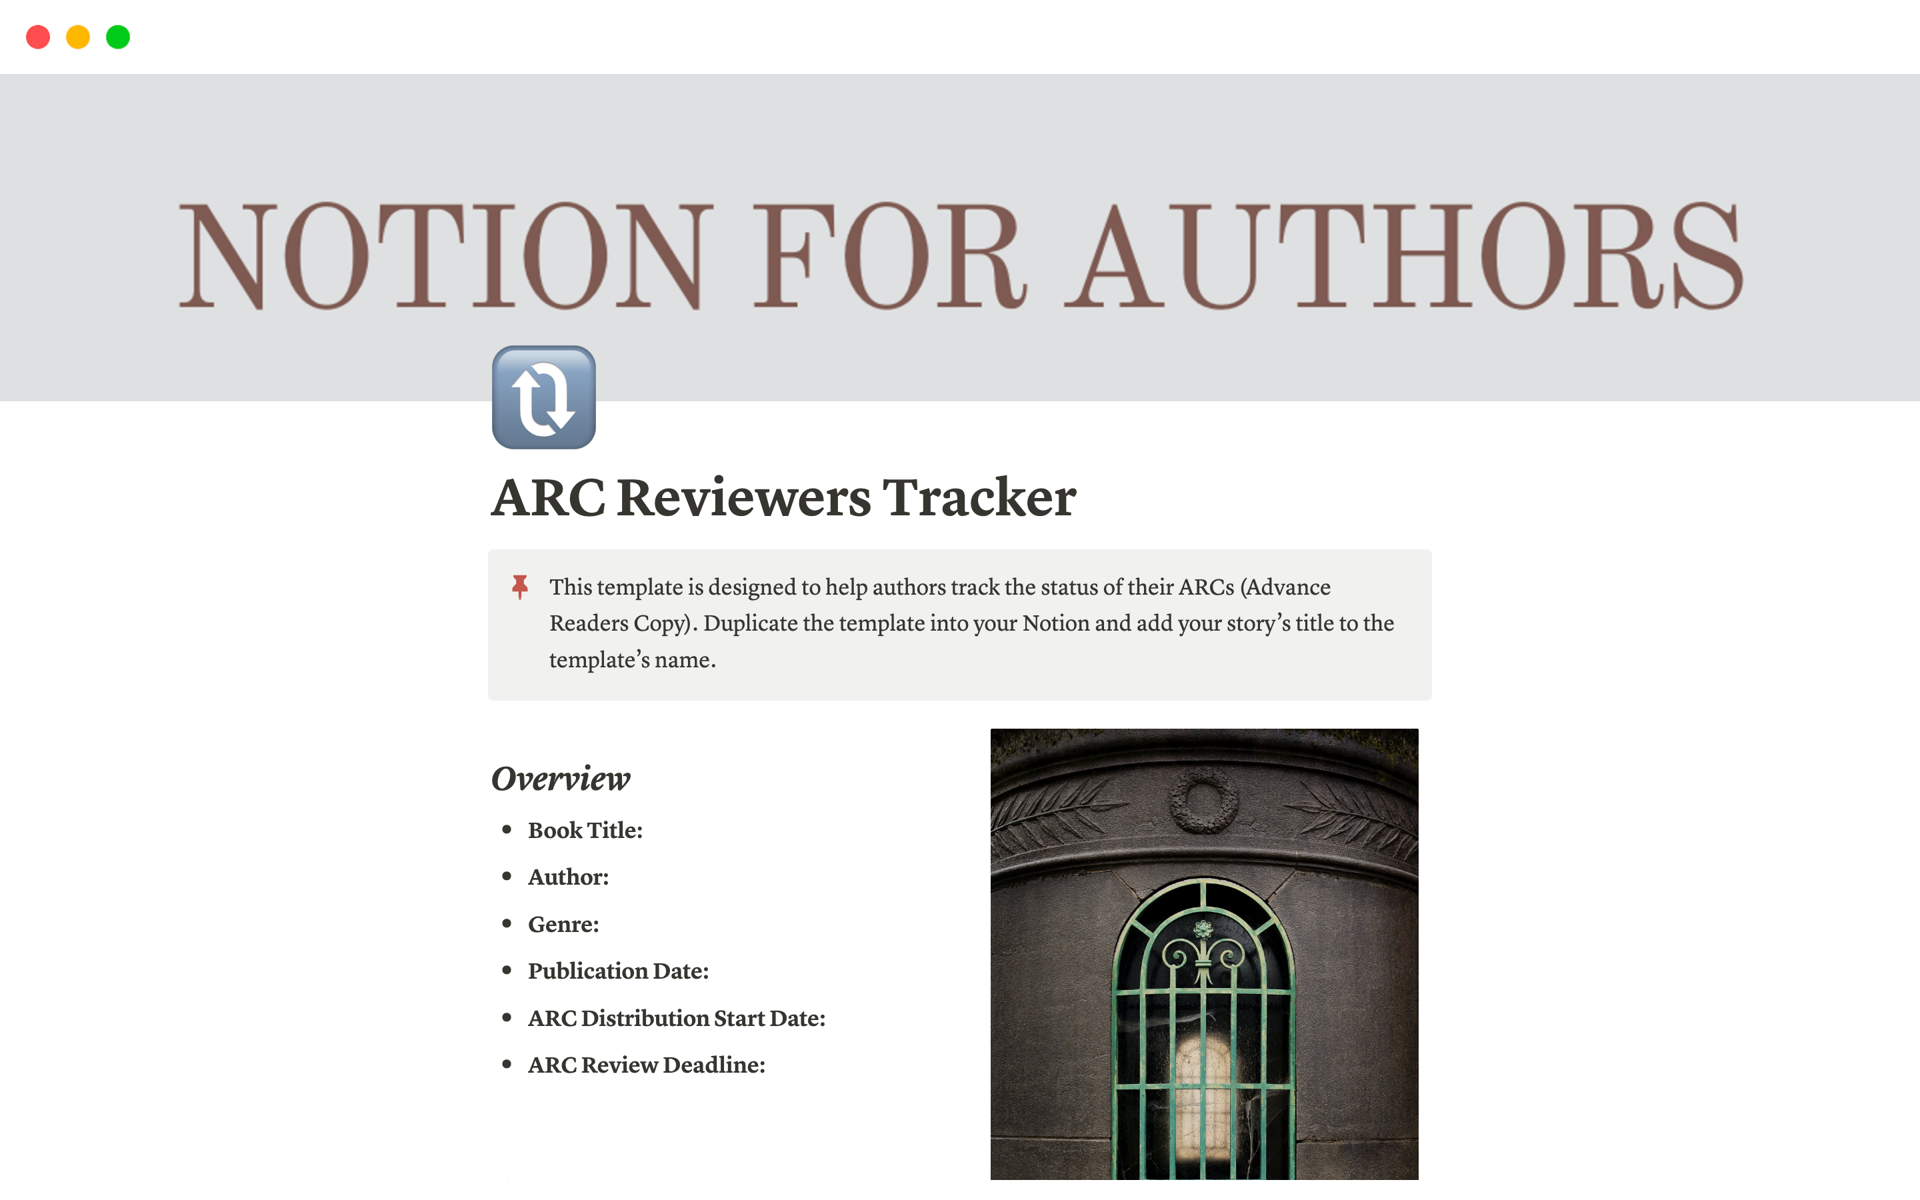 This template is designed to assist authors track all advance readers copies sent out to reviewers.